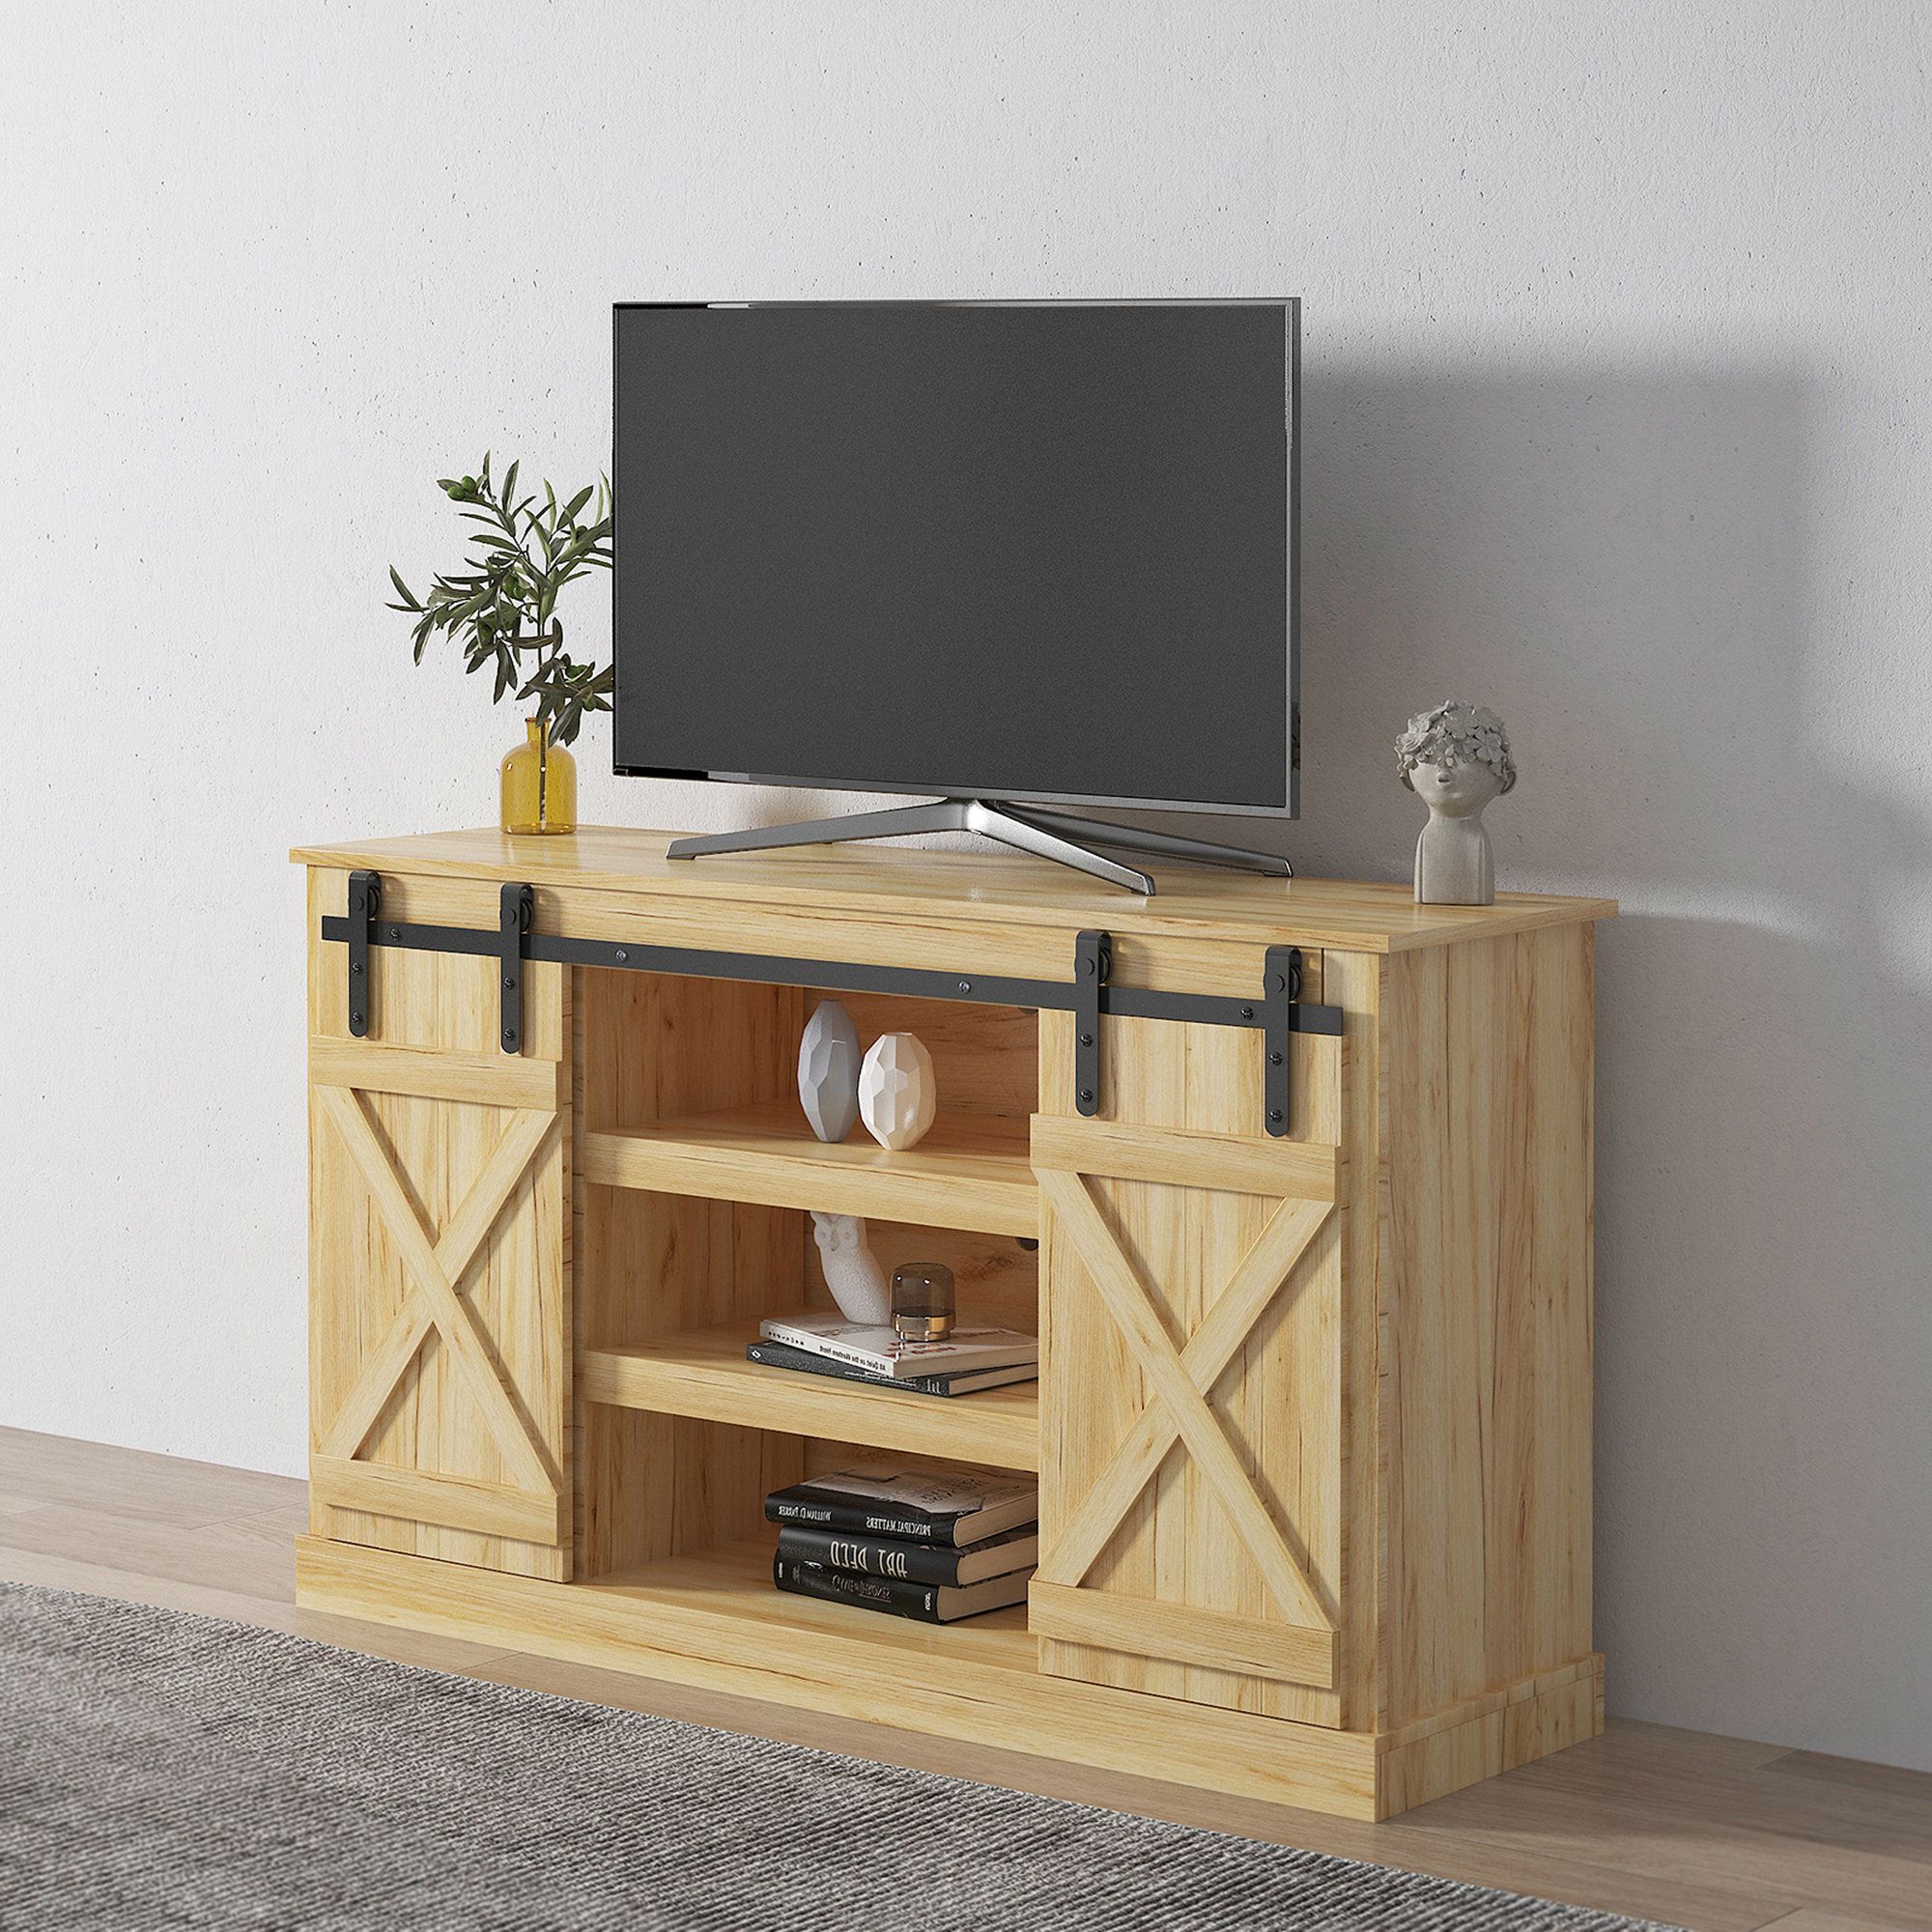 Gracie Oaks Farmhouse Sliding Barn Door Tv Stand Media Console Table  Storage Cabinet Wood For 65" | Wayfair Regarding Barn Door Media Tv Stands (View 16 of 20)